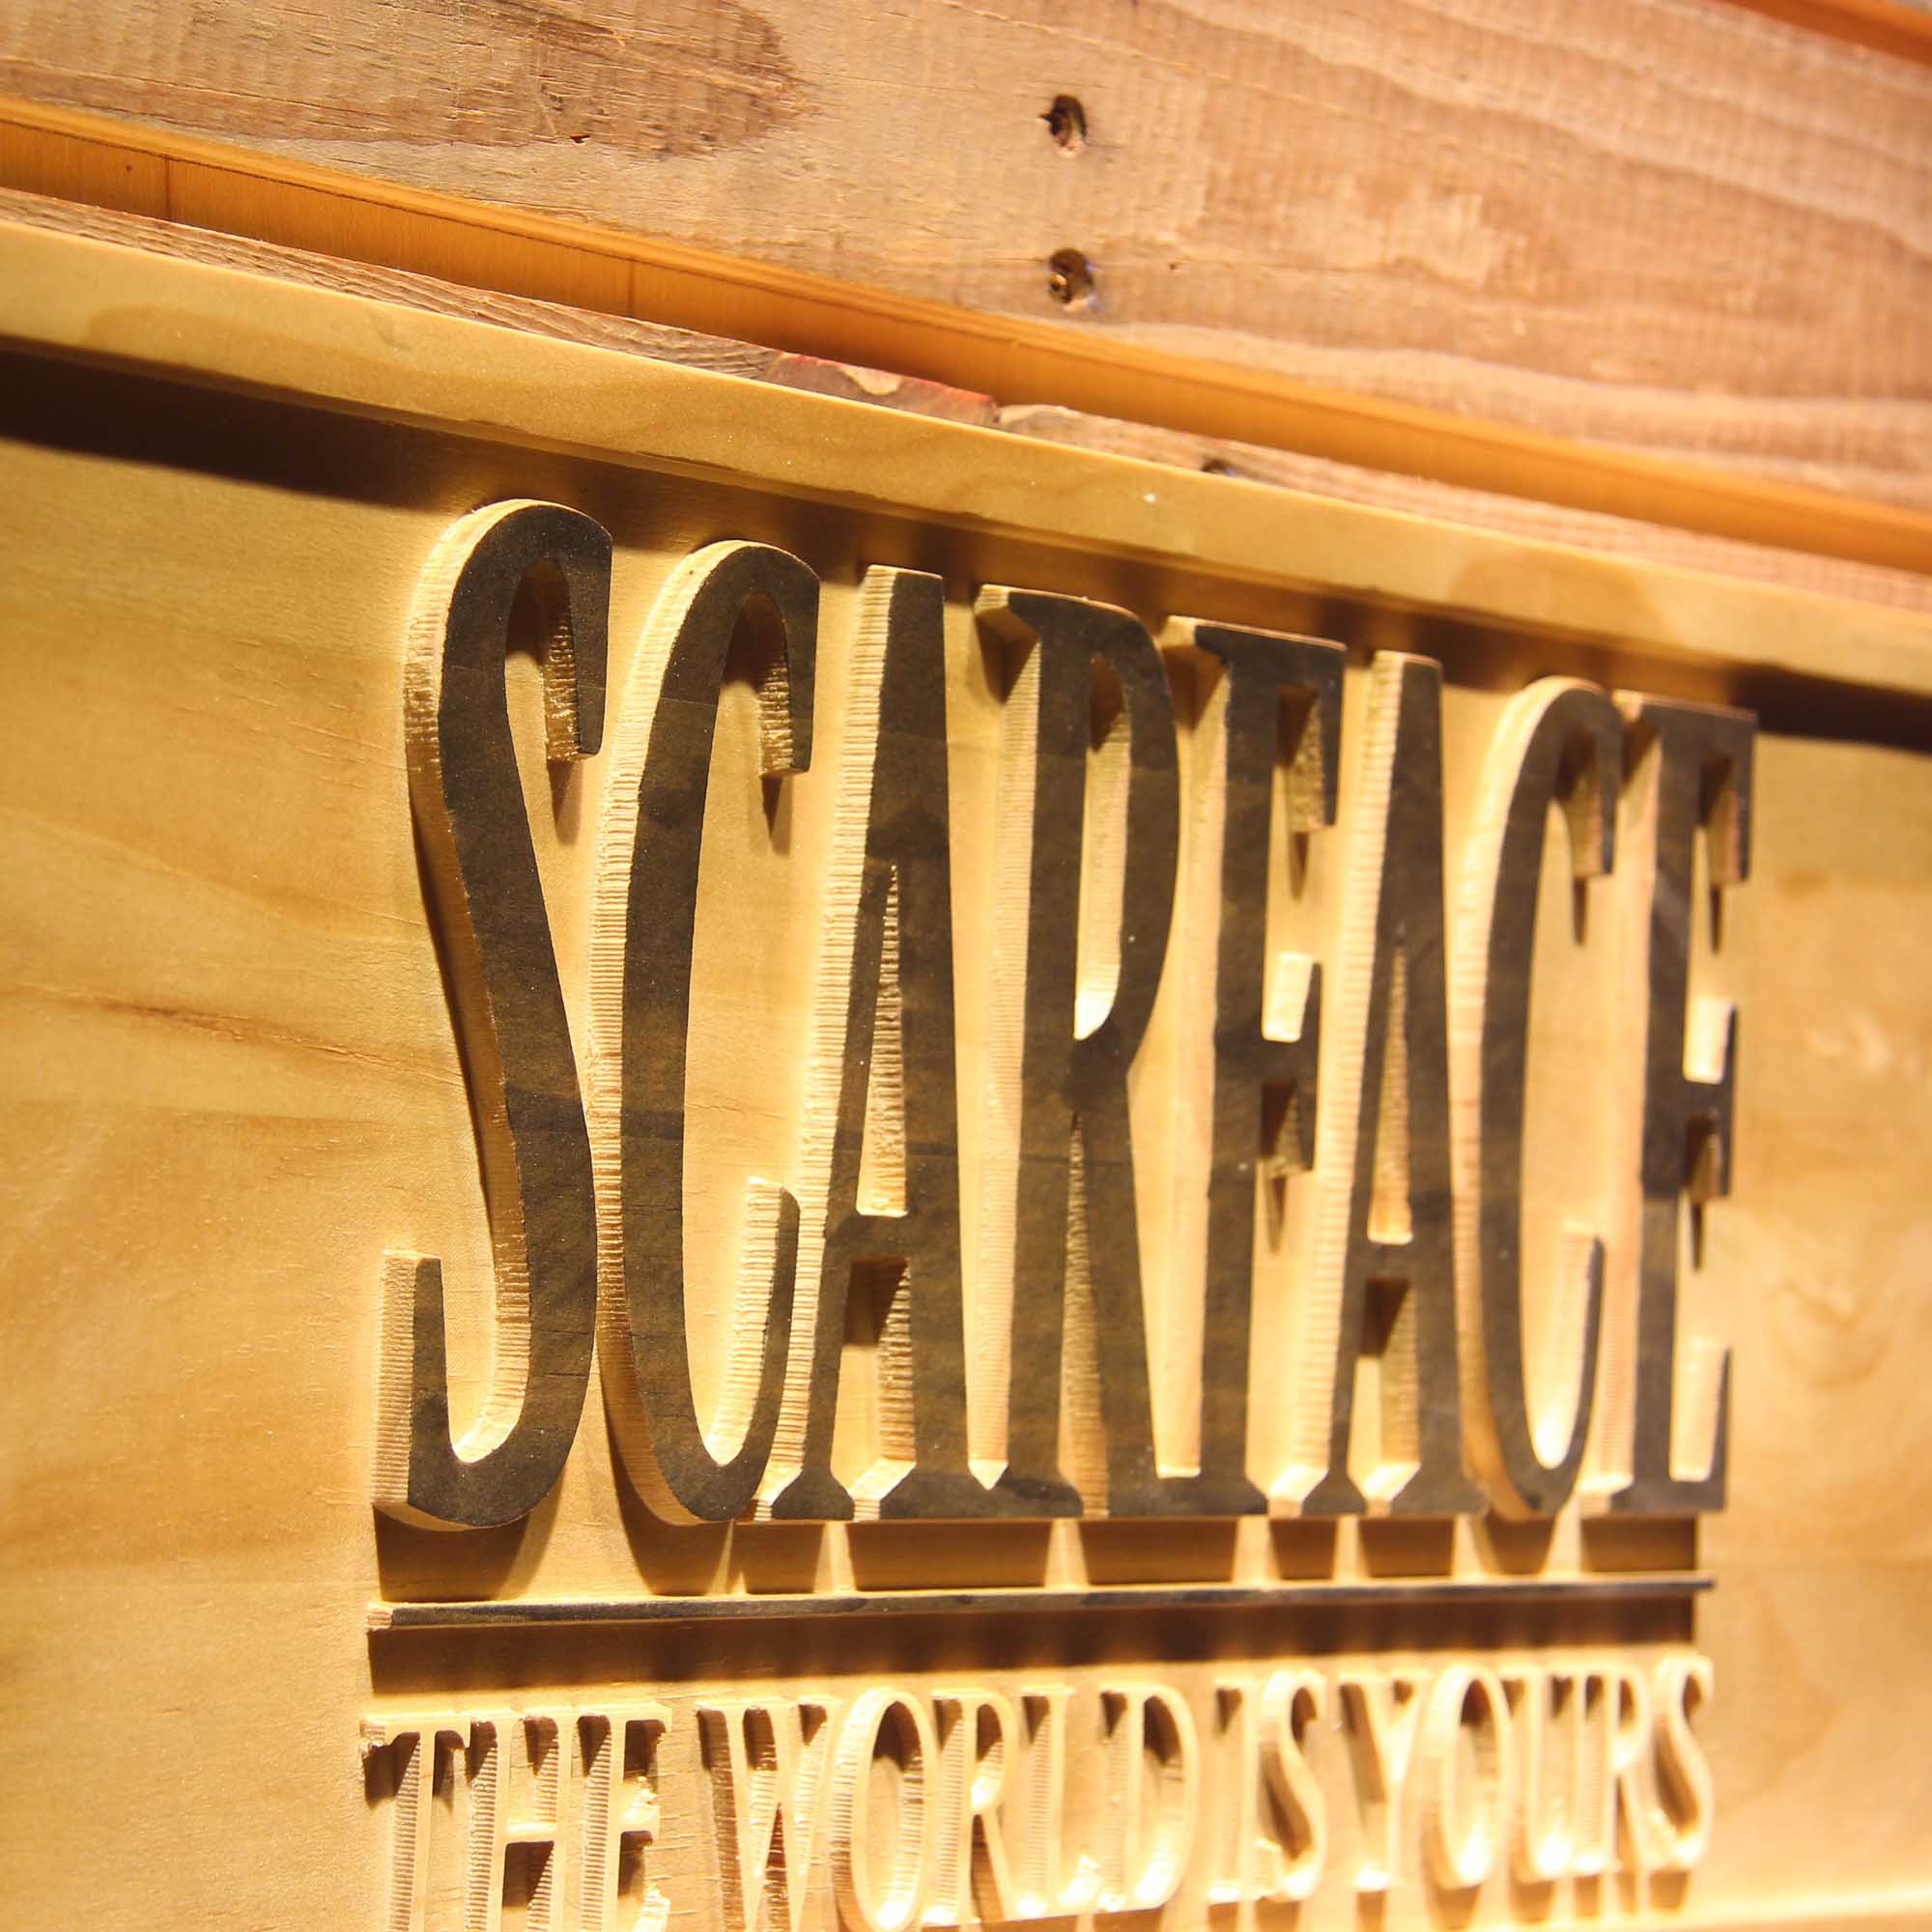 Scarface The World is Yours 3D Wooden Engrave Sign